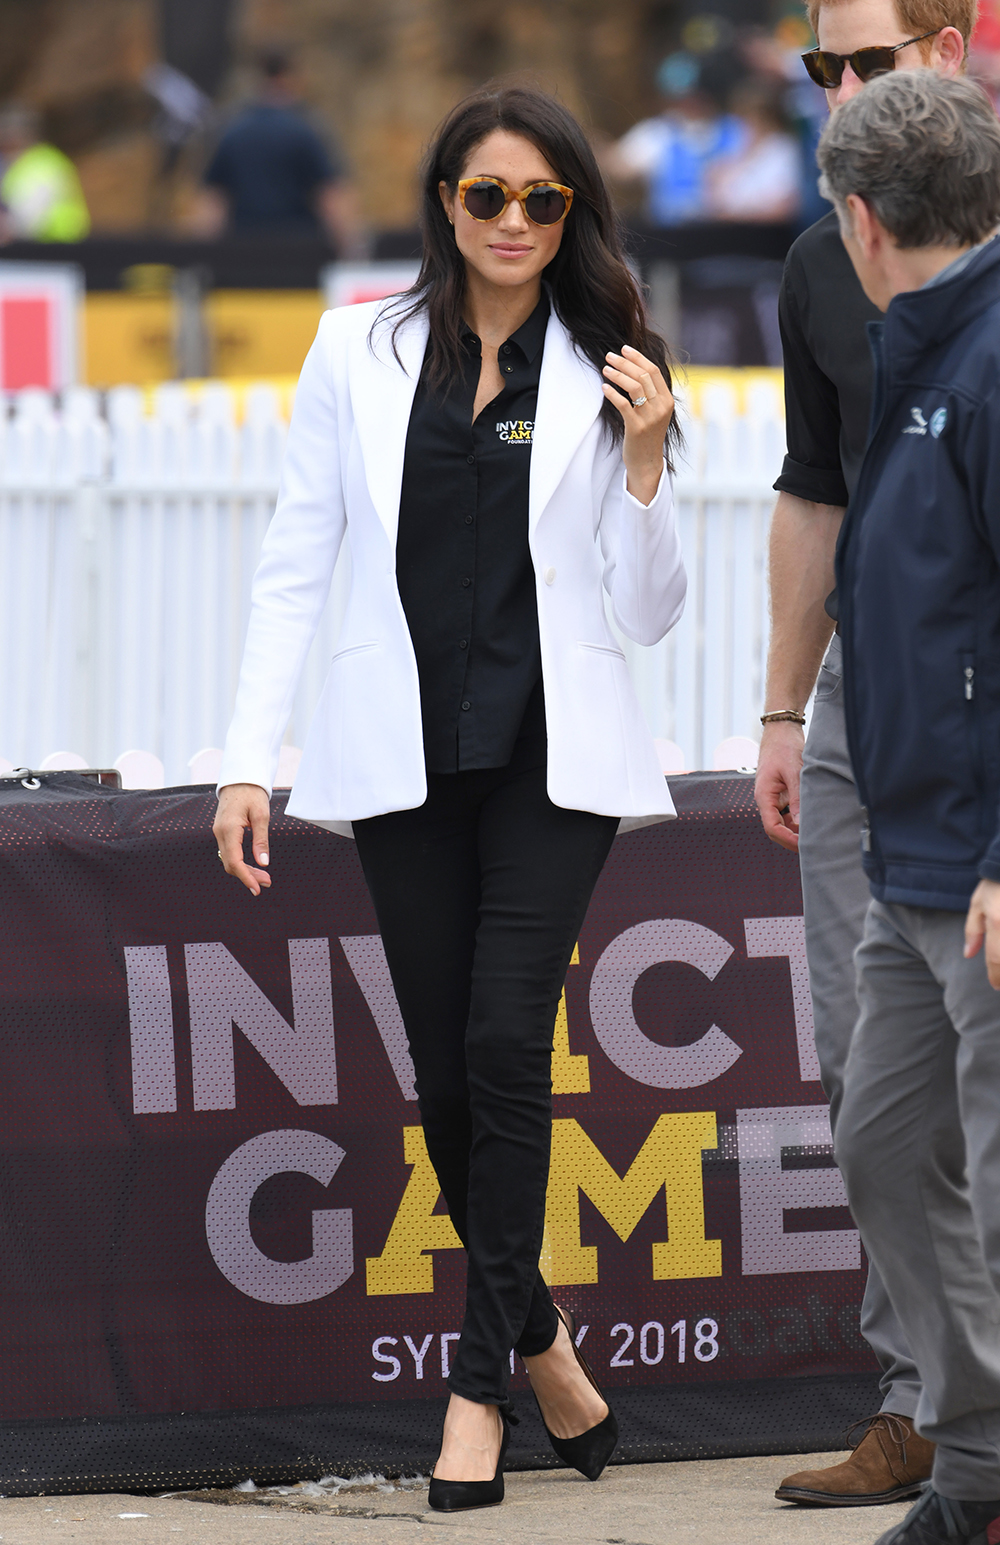 SYDNEY, AUSTRALIA - OCTOBER 20: Meghan, Duchess of Sussex attends the Invictus Games Sydney 2018 Jaguar Land Rover Driving Challenge on Cockatoo Island on October 20, 2018 in Sydney, Australia. The Duke and Duchess of Sussex are on their official 16-day Autumn tour visiting cities in Australia, Fiji, Tonga and New Zealand. (Photo by Karwai Tang/WireImage)